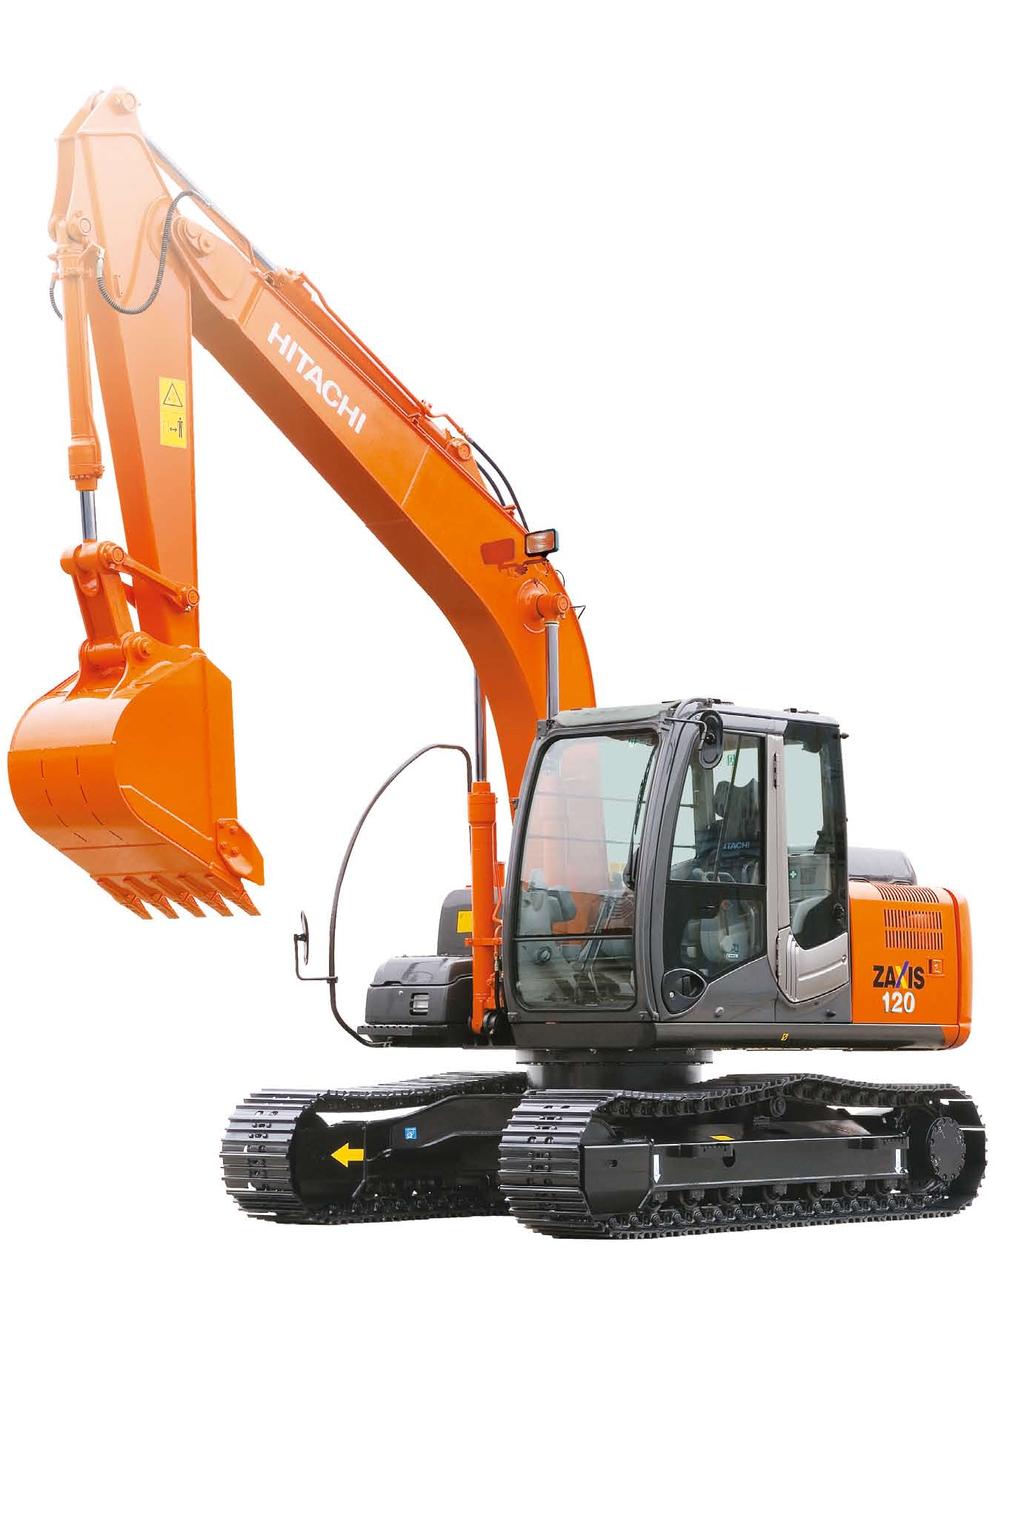 ZAXIS-3 series HYDRAULIC EXCAVATOR Model Code : ZX120-3 / ZX130K-3 Engine Rated Power : 69 kw (93 HP) Operating Weight :